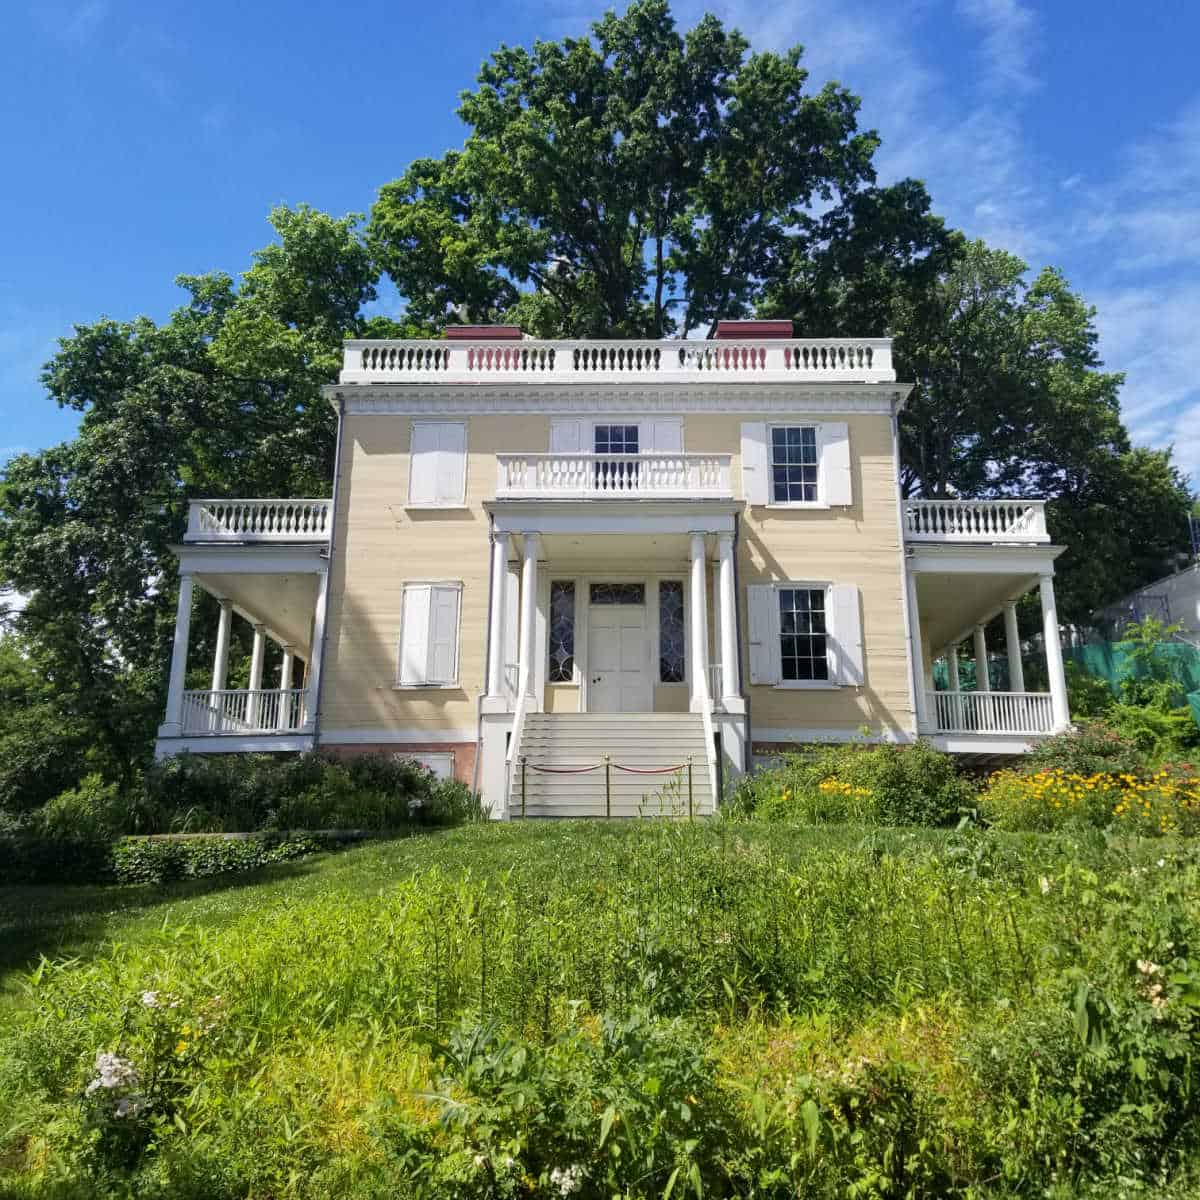 Historic two story house with steps leading up to it on a grassy hill with a tree behind it